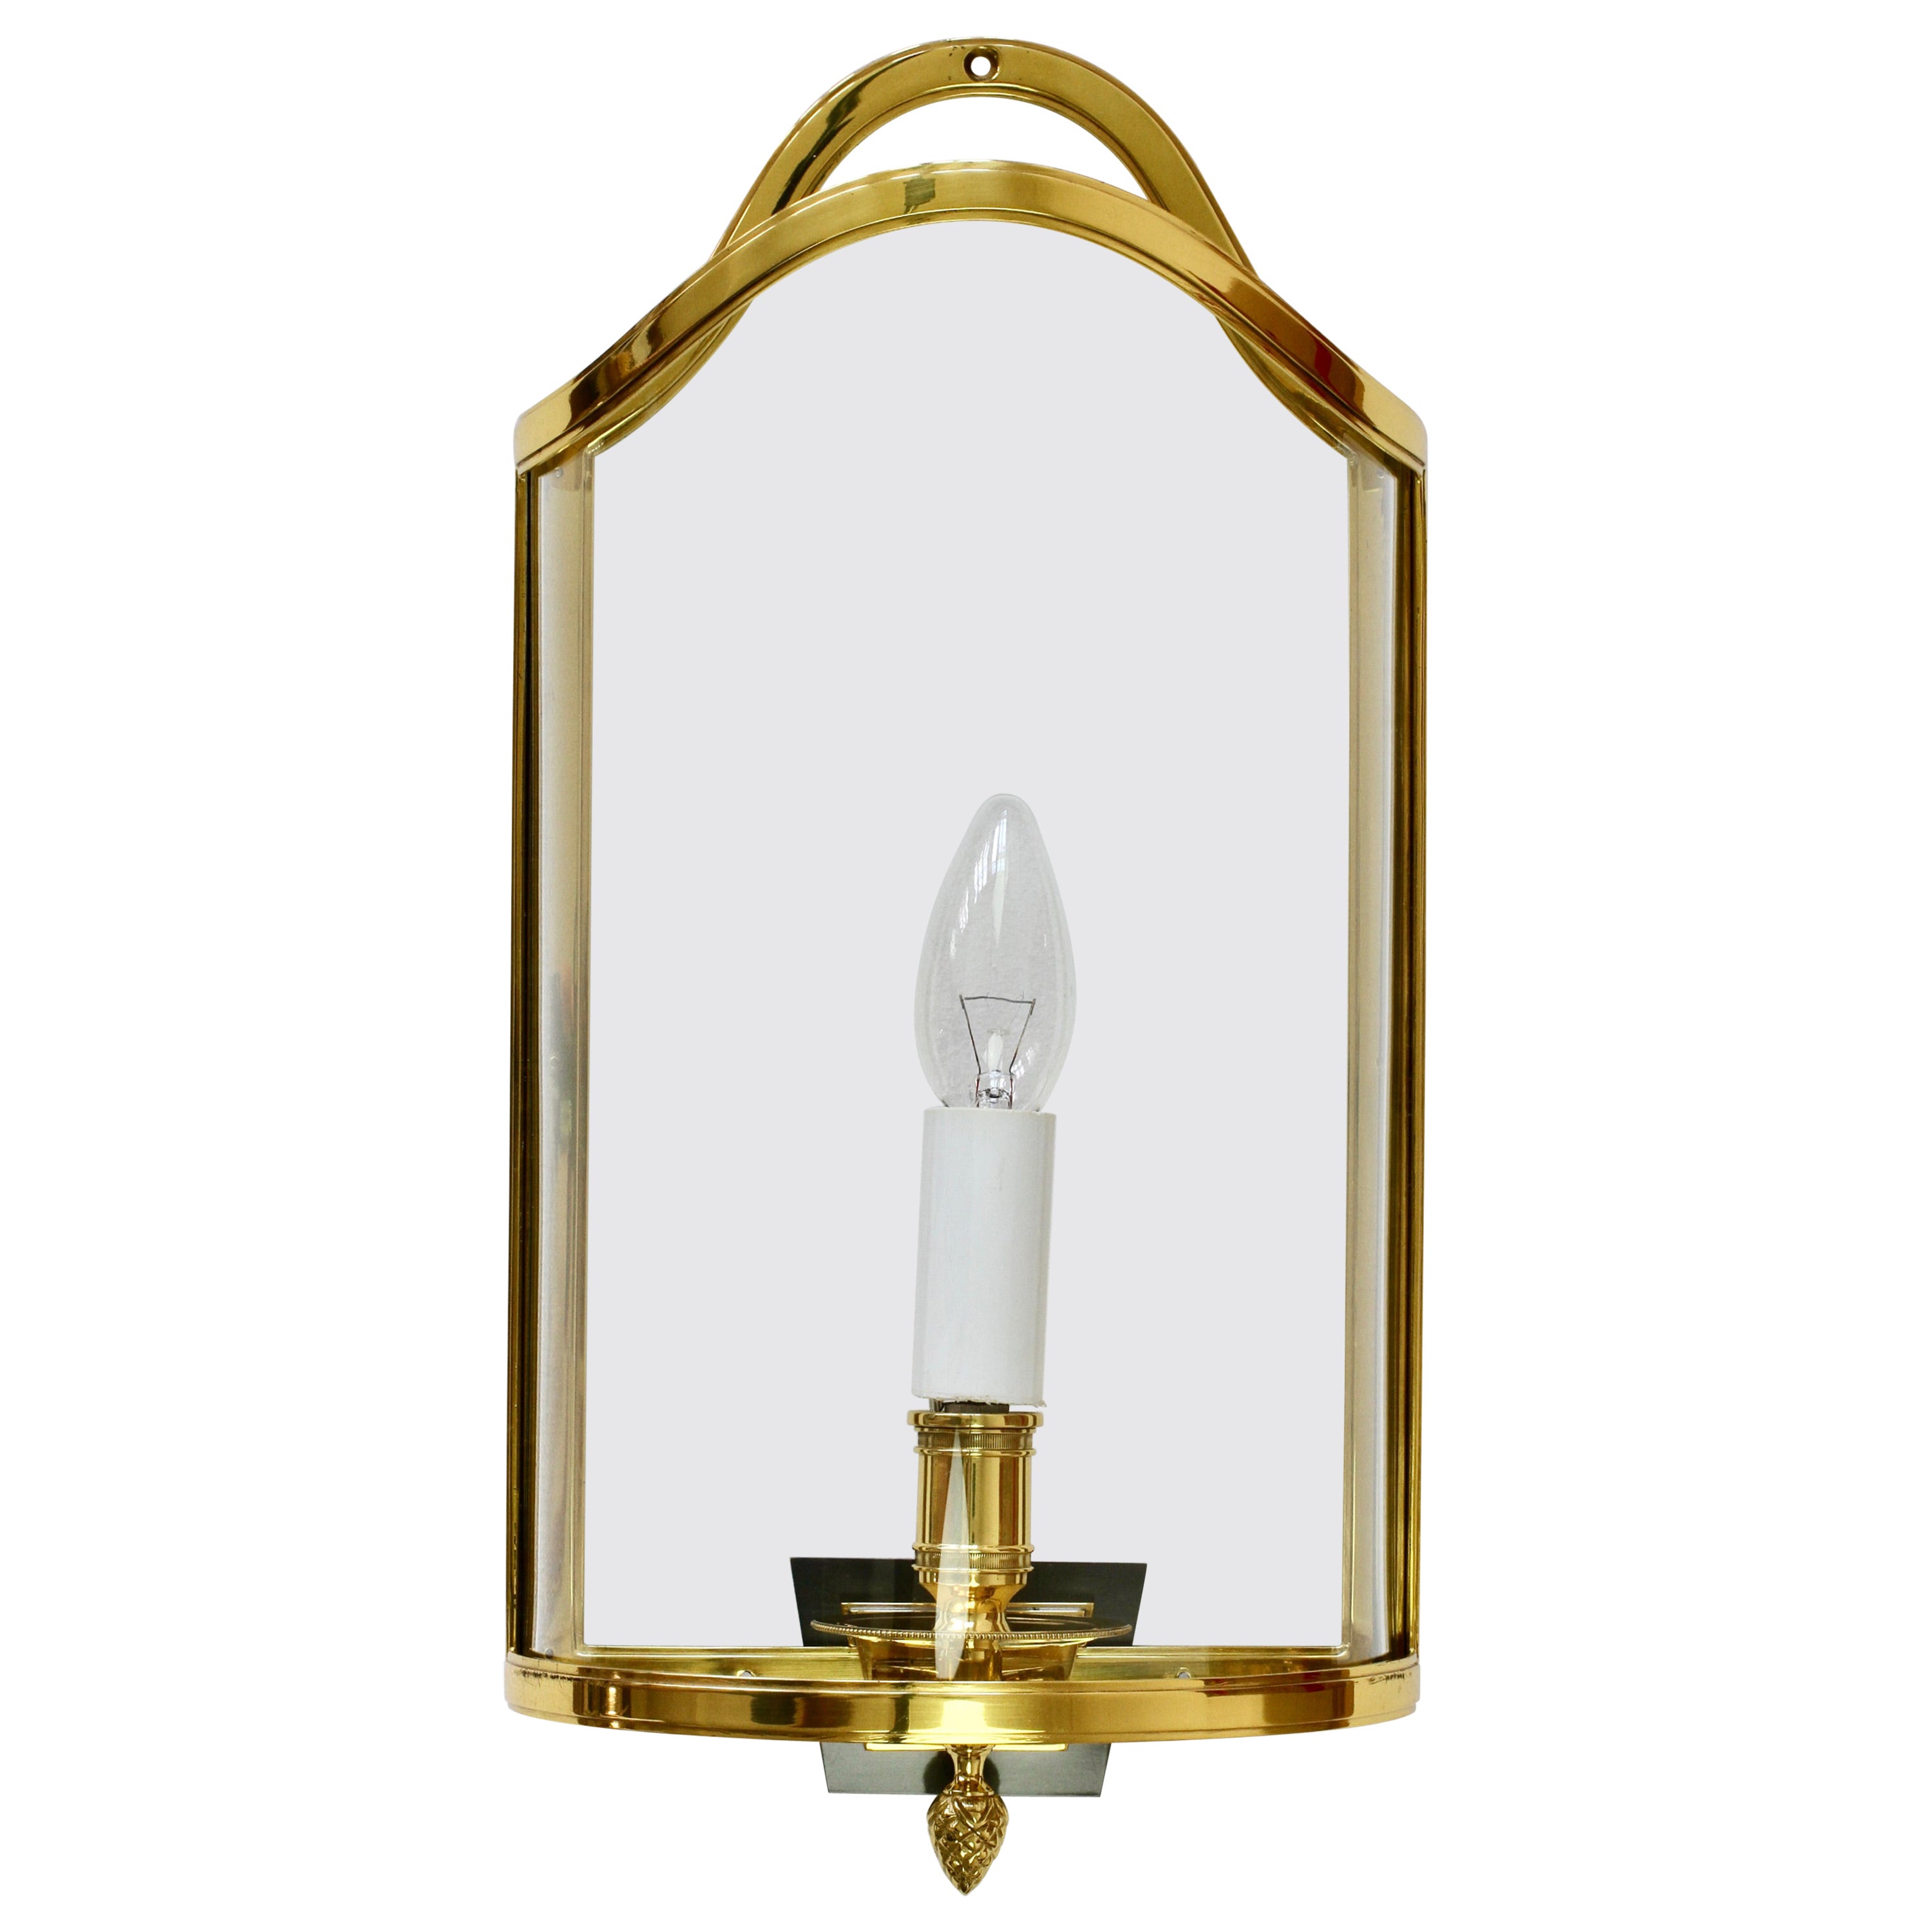 One of a set of five stunning elegant and large scale vintage mid-century vintage wall lights, lamps or sconces made of polished brass with original curved and cut glass scroll shaped shades by the German united ateliers Vereinigten Werkstätten